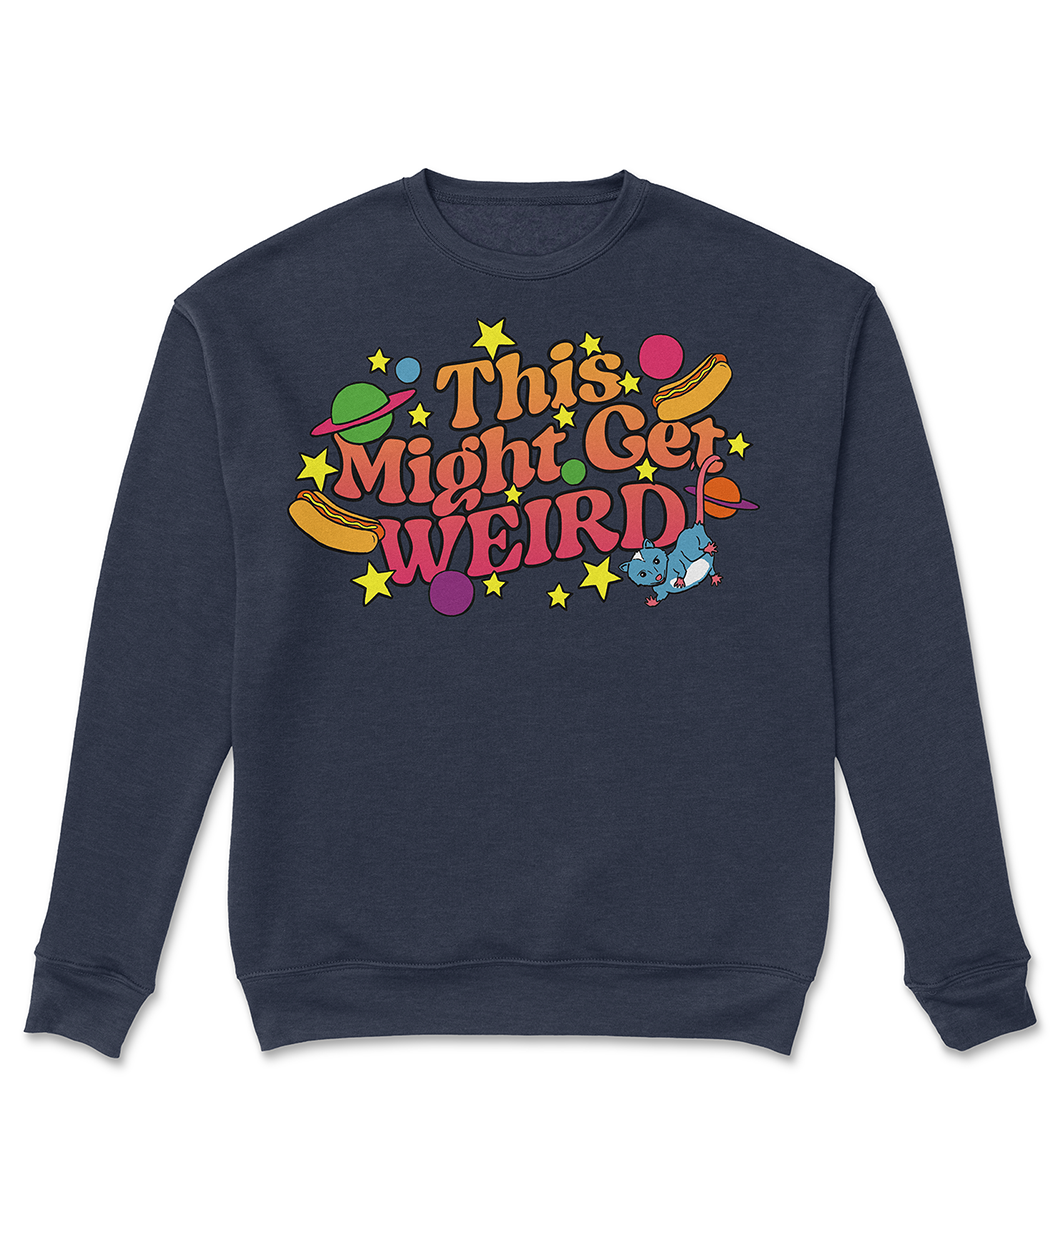 A dark blue crewneck with fun, curvy, gradient orange and pink text that reads "This Might Get WEIRD" across the chest. Around the text are colorful, illustrated objects like hot dogs, cats, stars and planets.